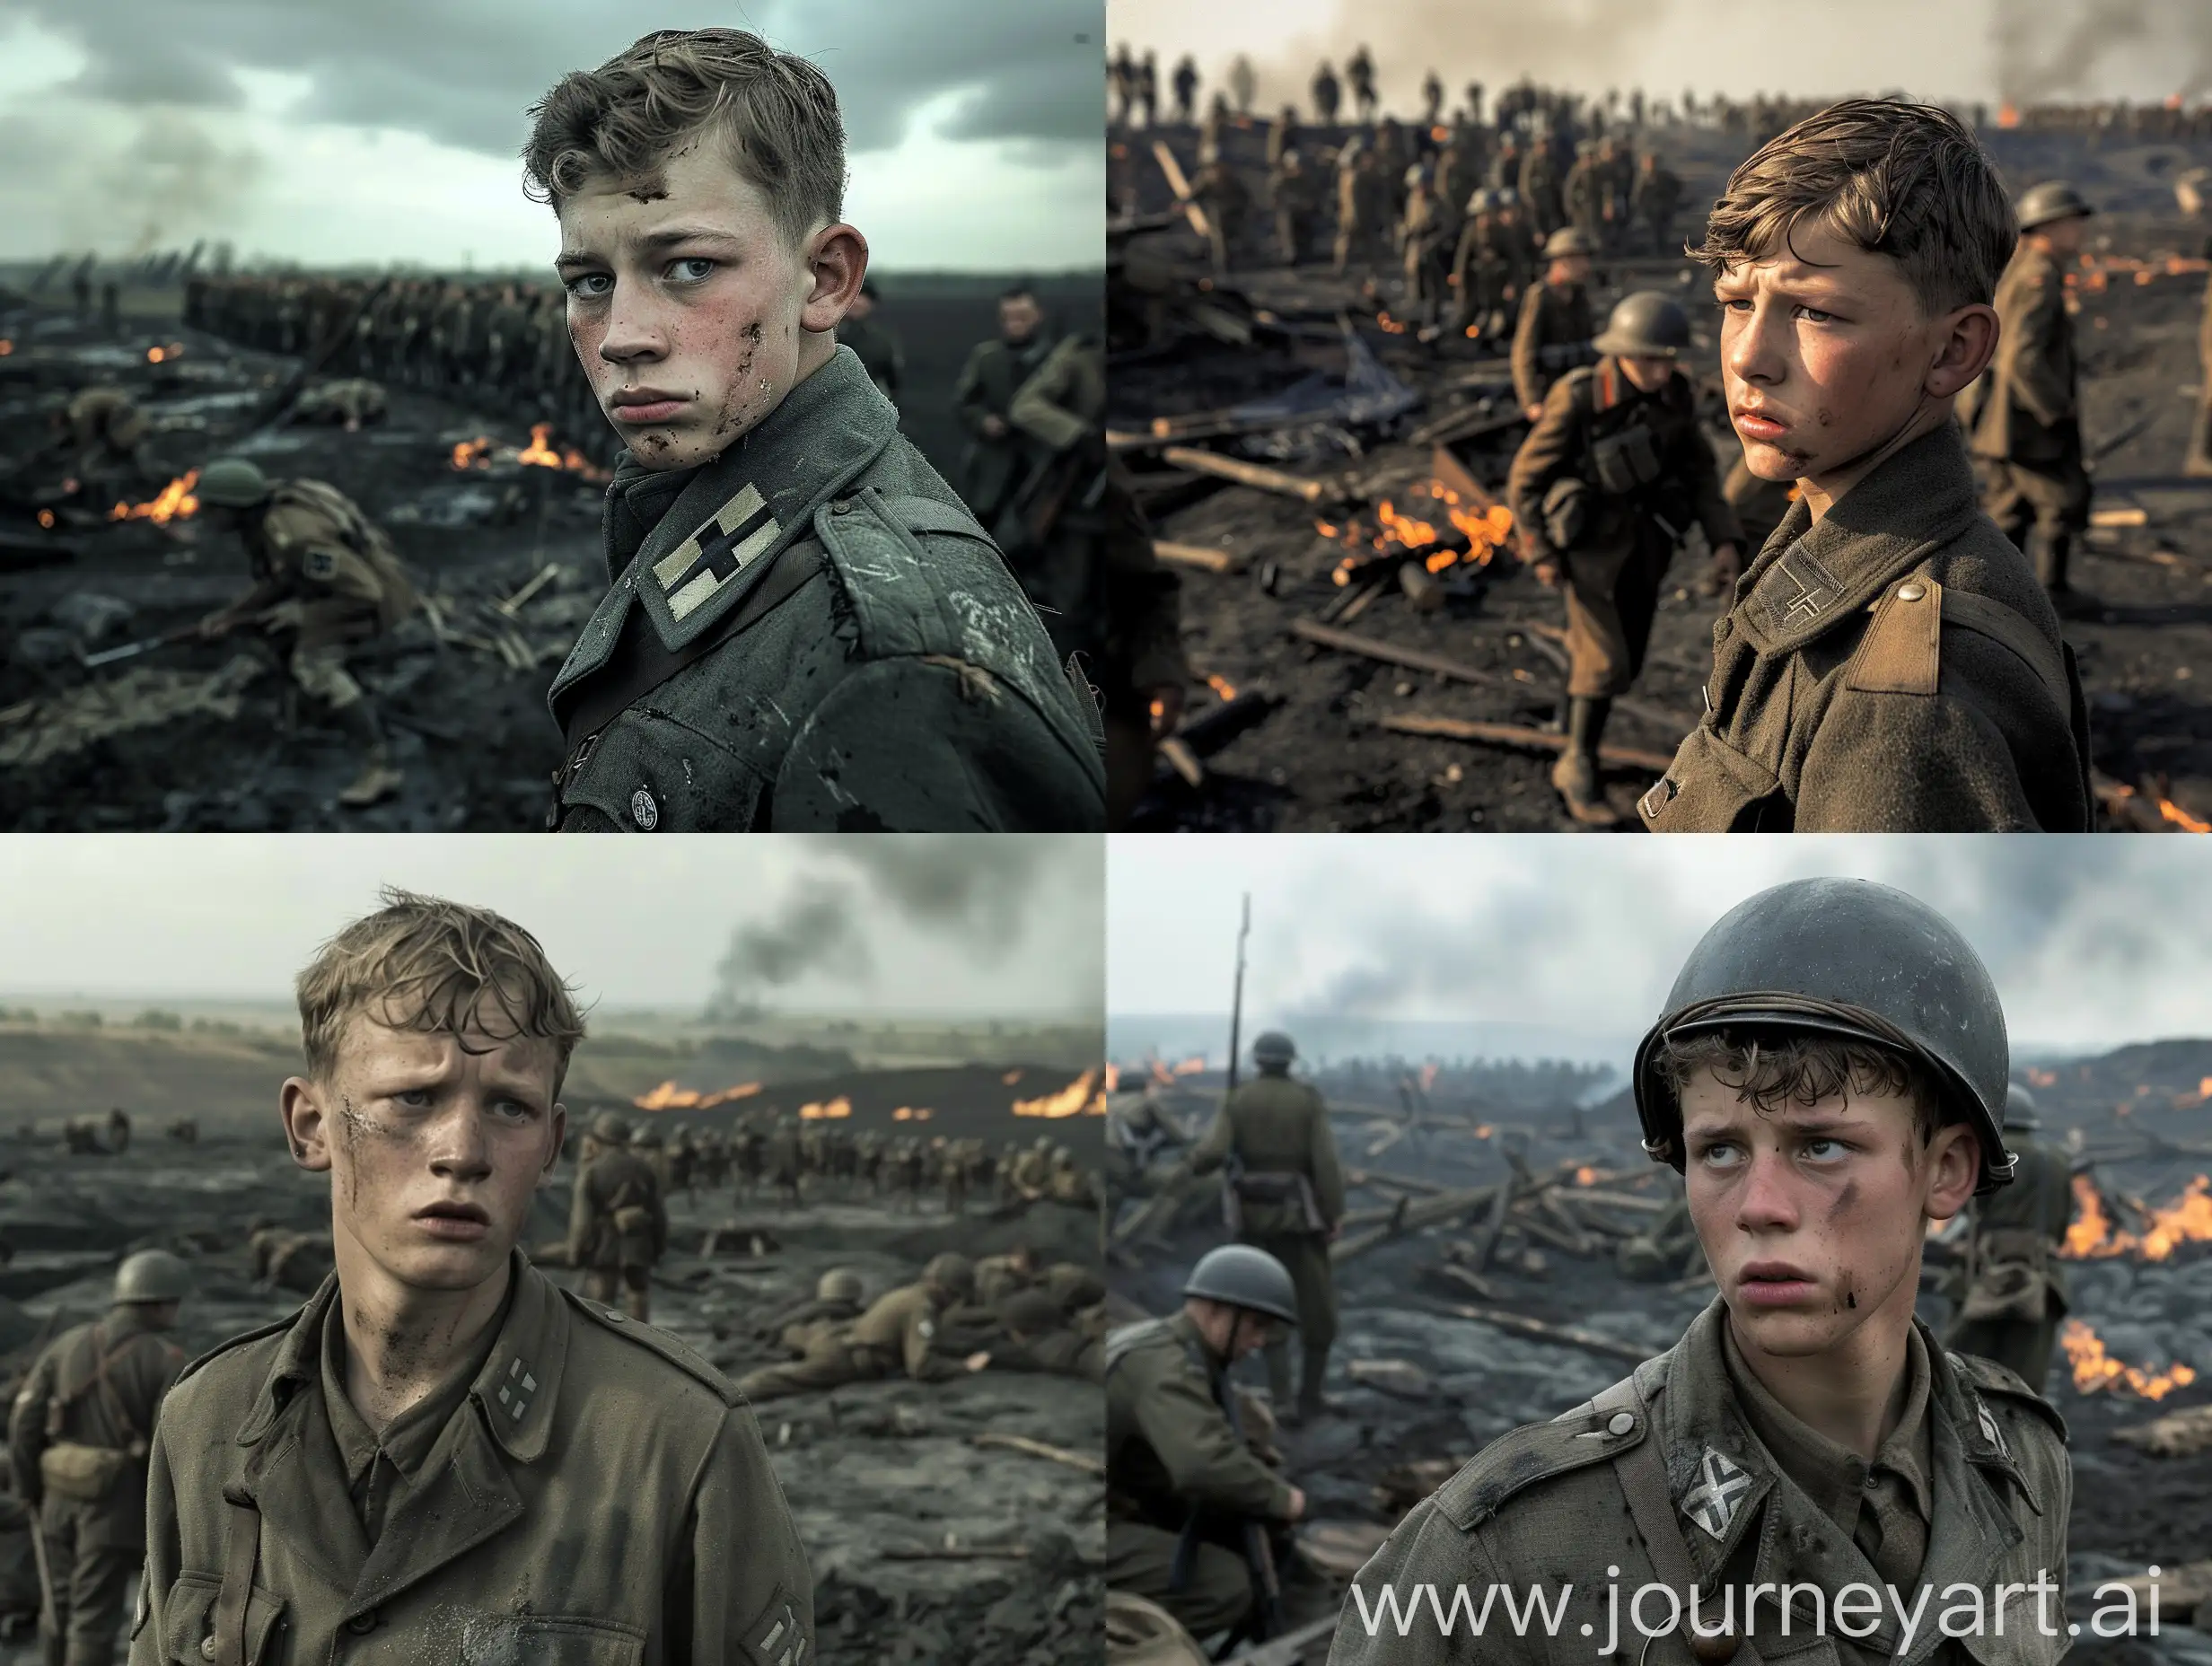 WW2 German soldier, young, looking lost, lots of soldiers in the background, burnt earth